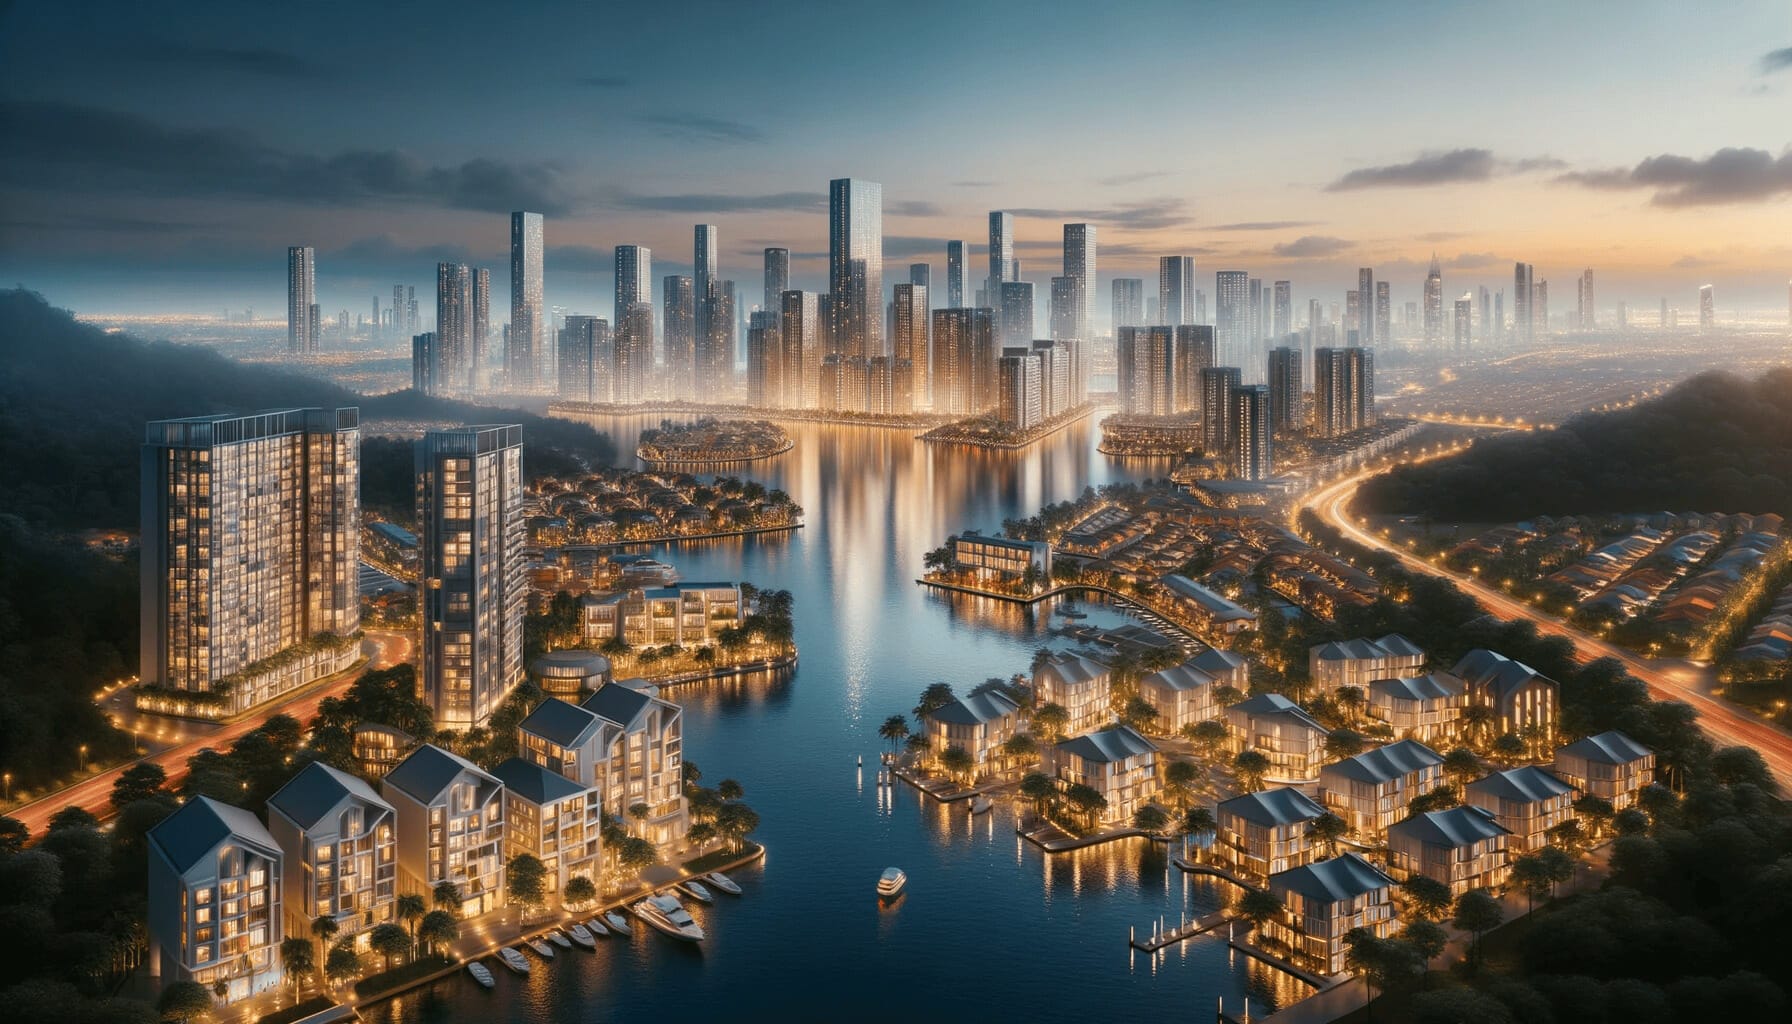 DALL·E 2023 10 16 17.26.46 A serene evening view of a Malaysian real estate landscape in 2023 with the glow of city lights waterfront properties and a calm river reflecting th